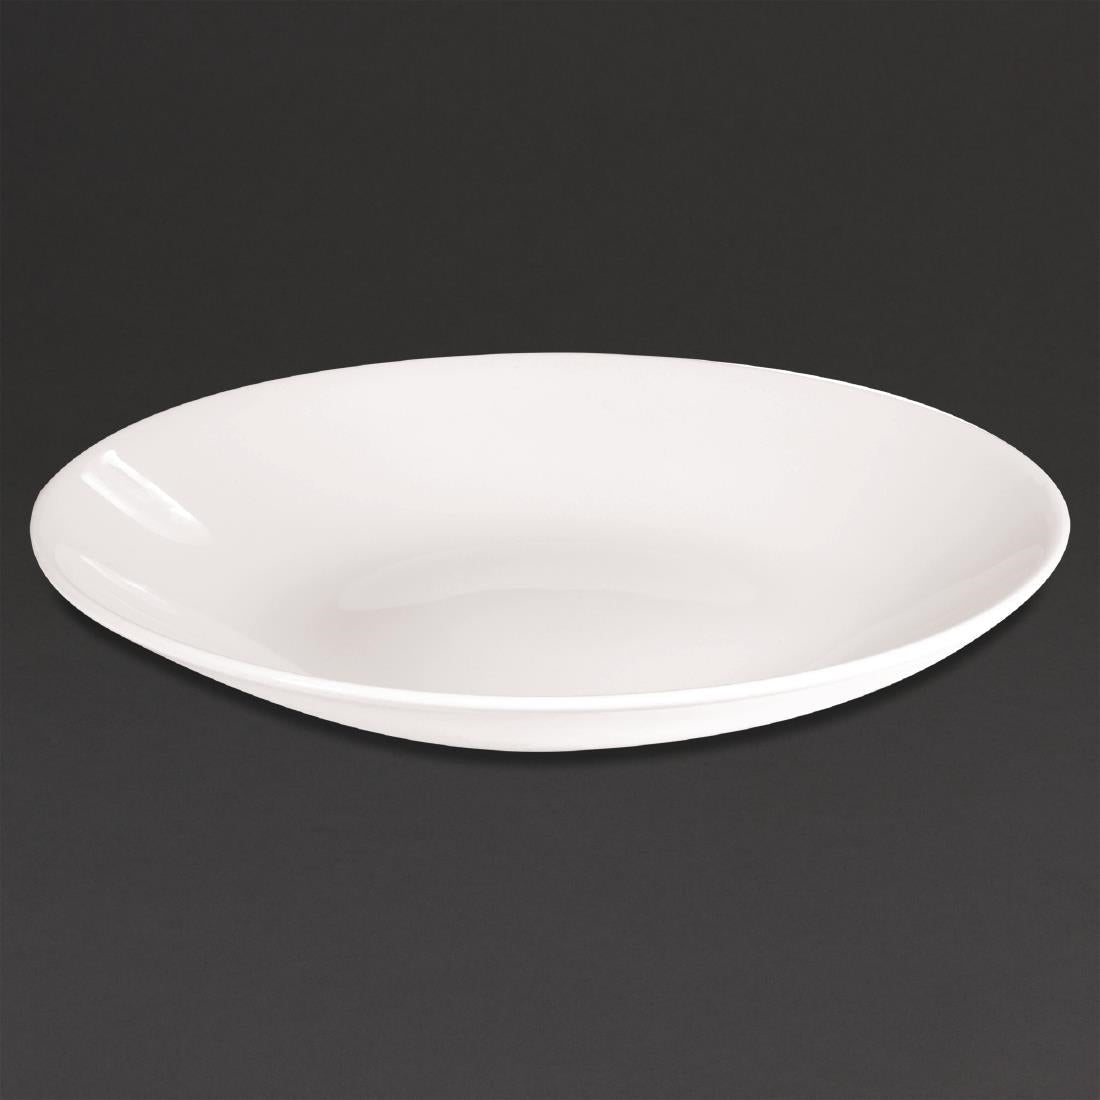 DA736 Churchill Profile Deep Coupe Plates 281mm (Pack of 12) JD Catering Equipment Solutions Ltd